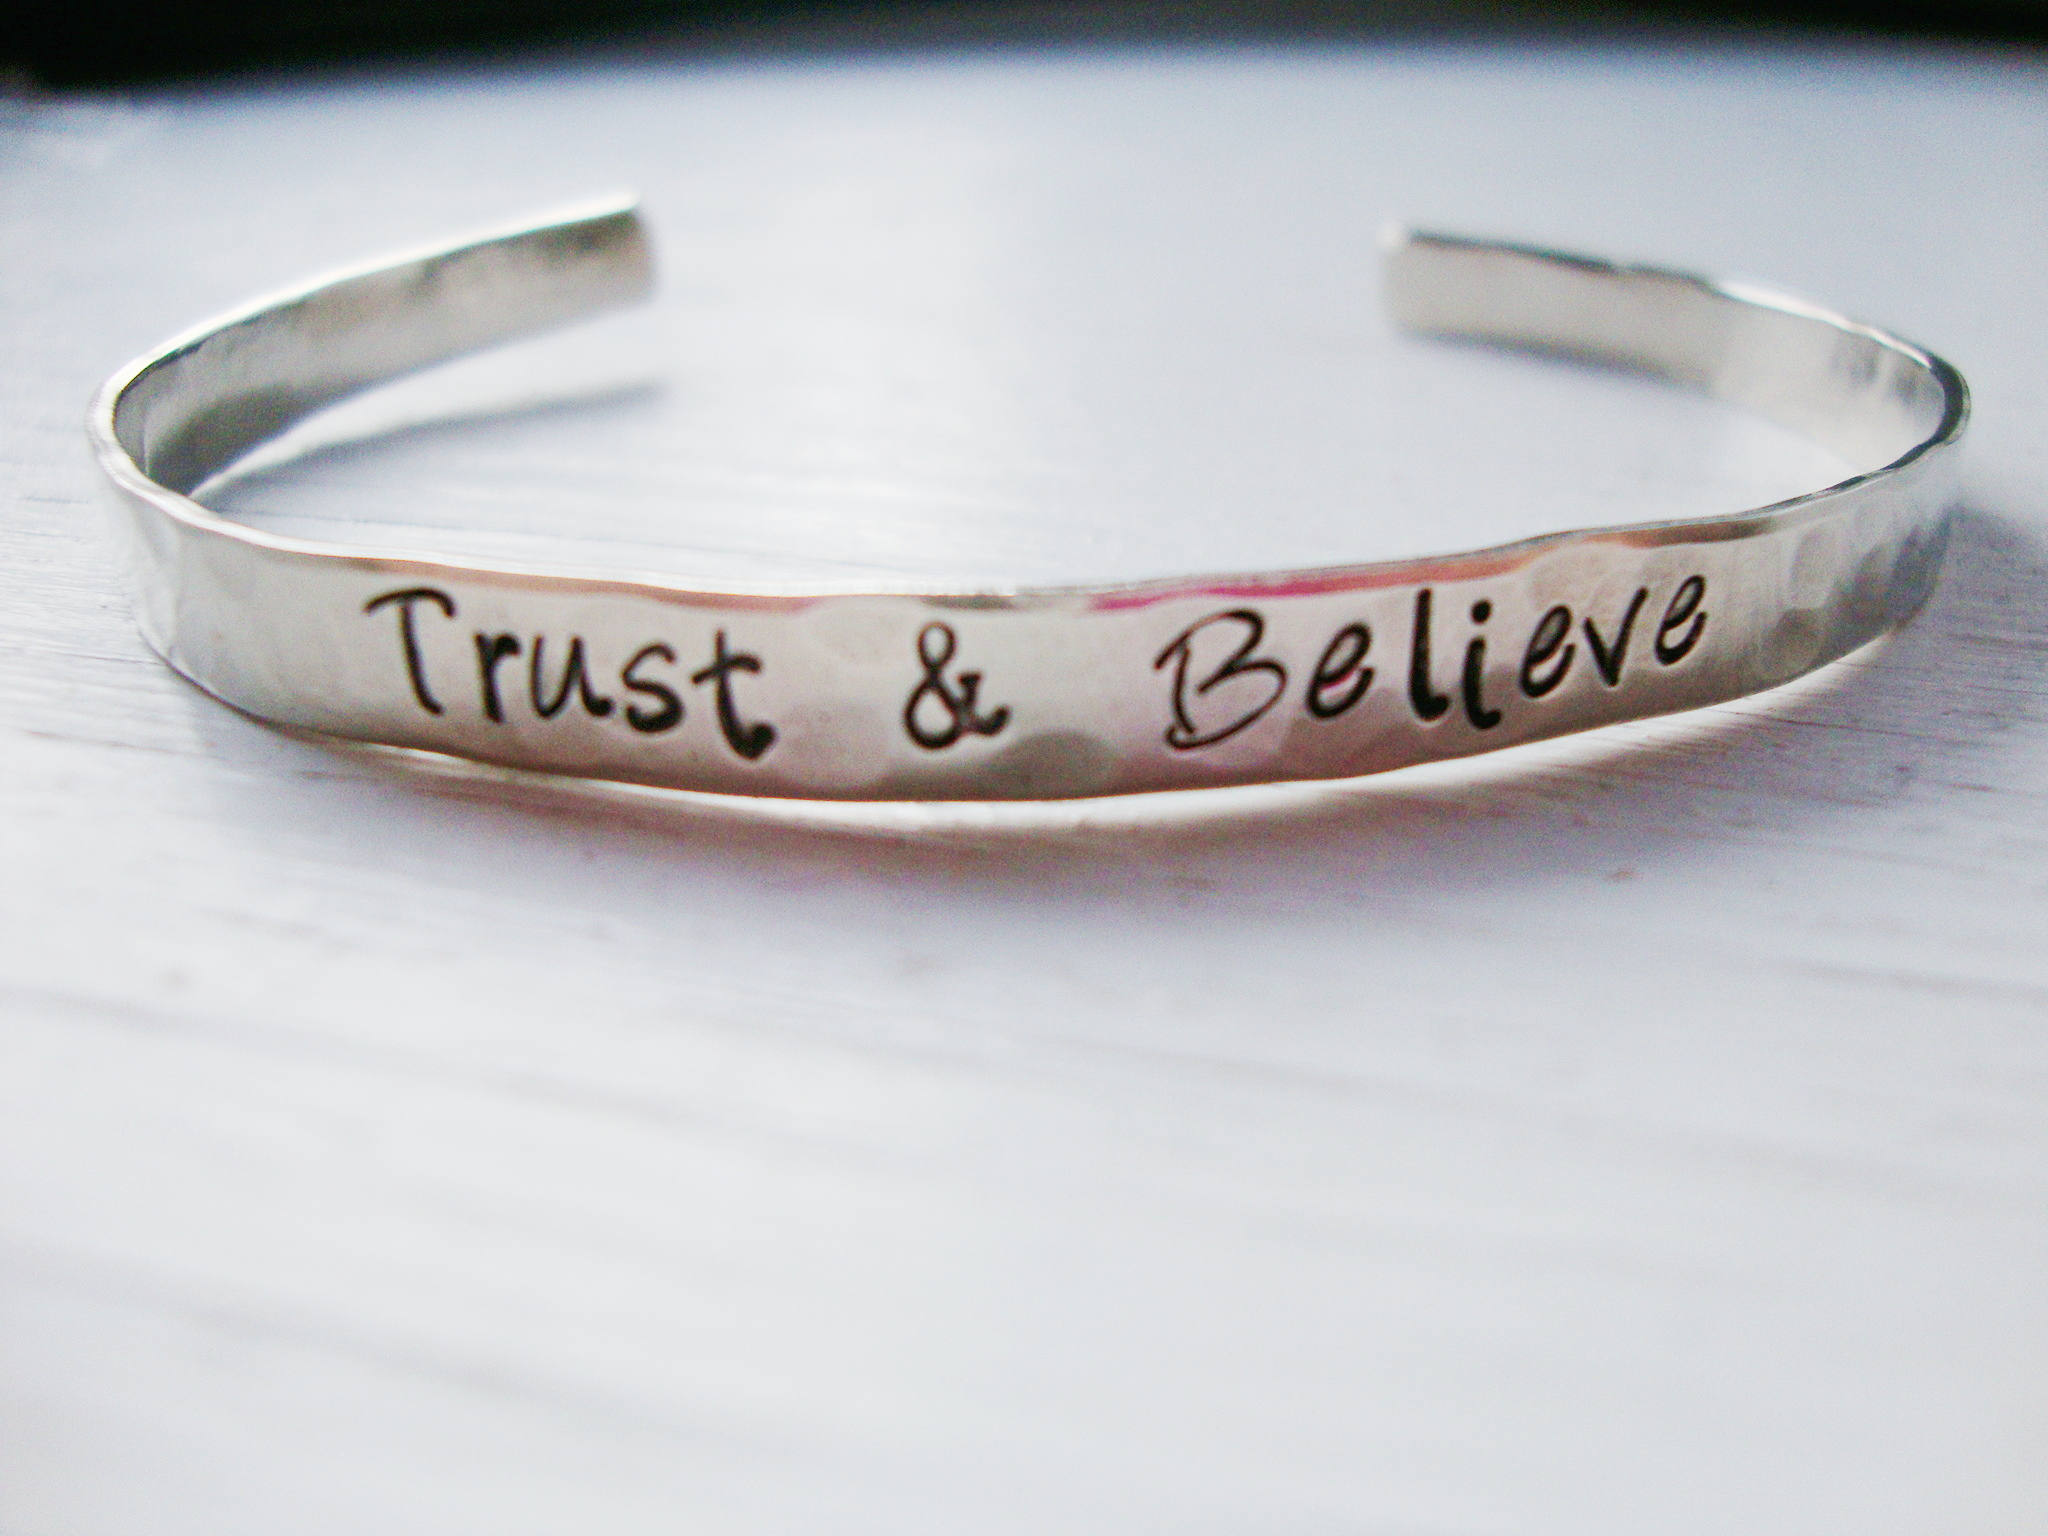 Trust and Believe hand stamped silver cuff bracelet | Etsy